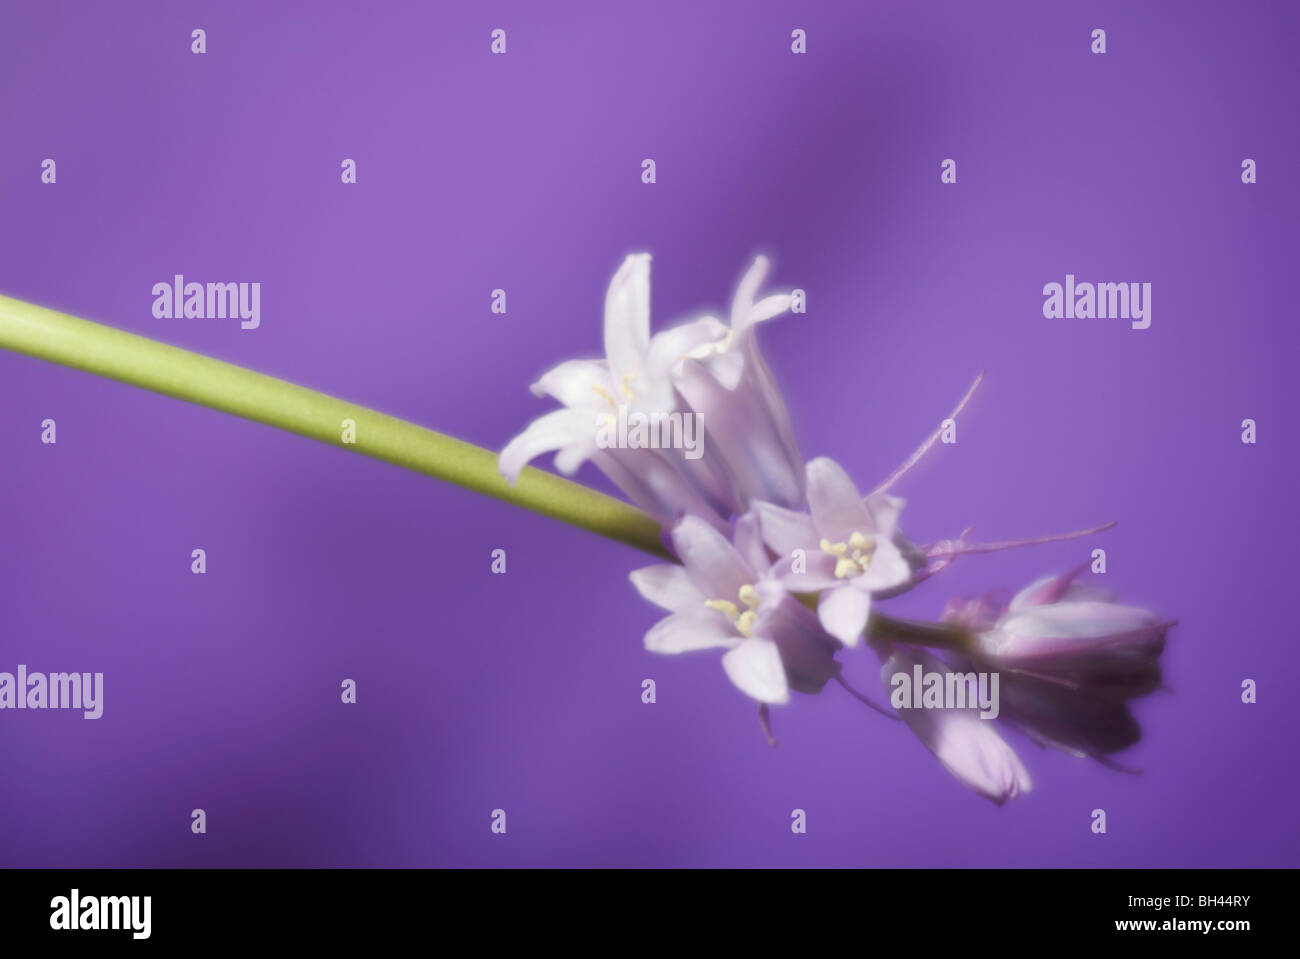 Bluebells (Hyacinthoides non-scripta) pink variety with romantic glow against purple background. Stock Photo